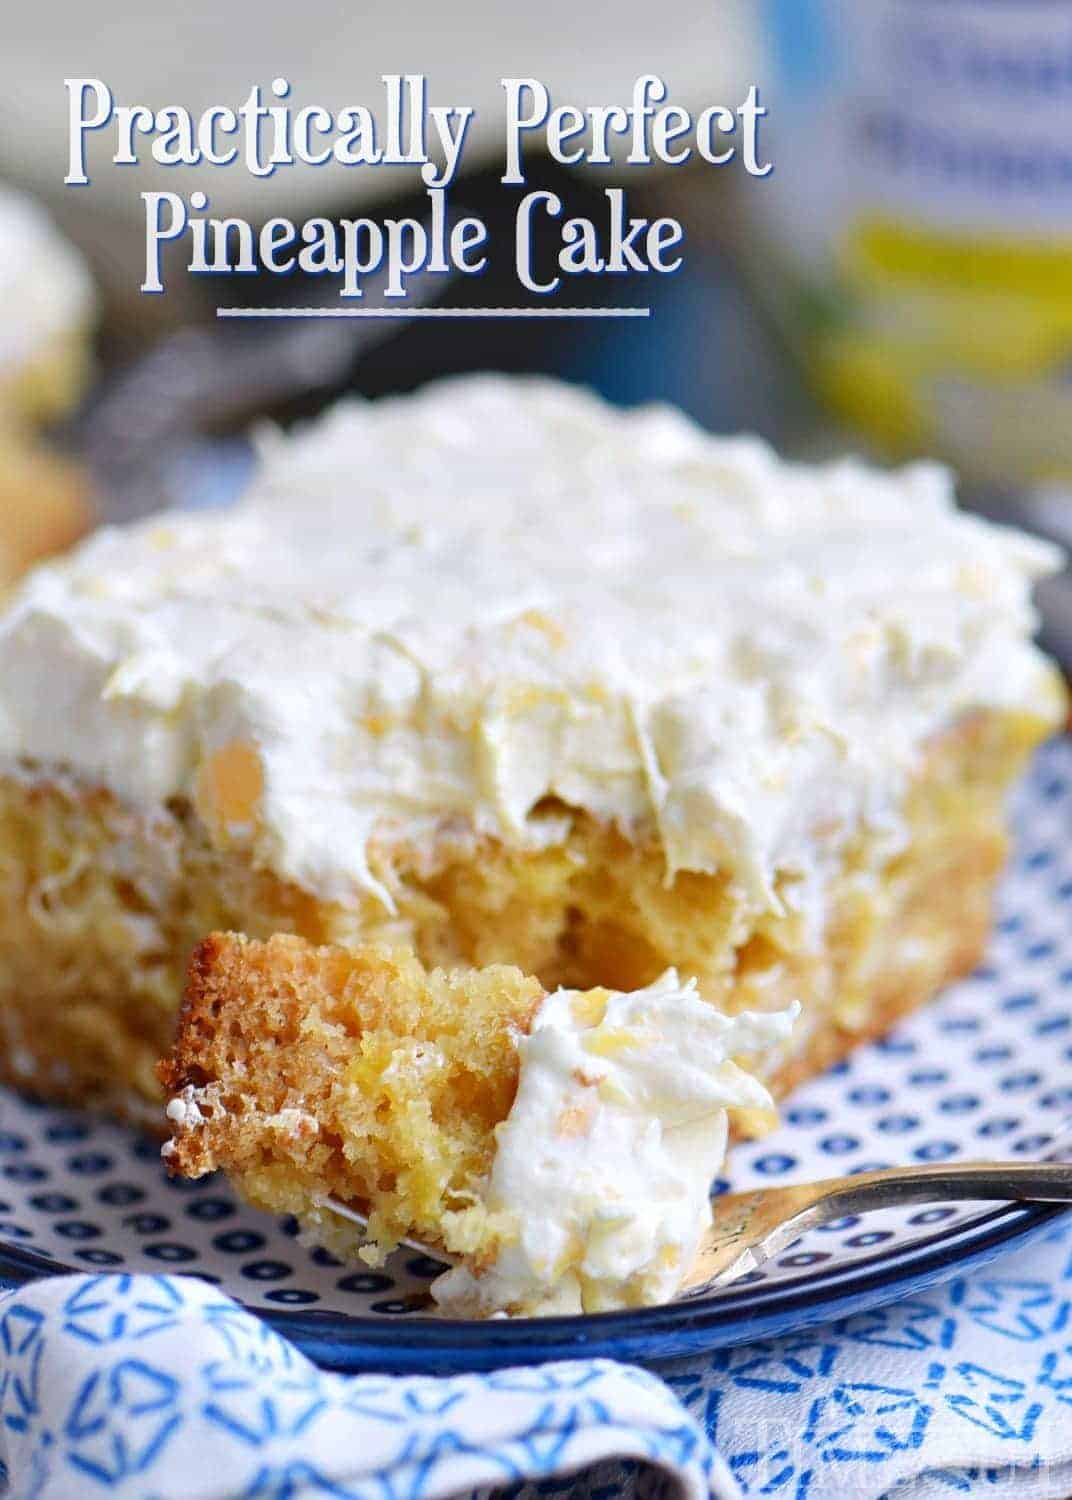 Practically perfect pineapple cake